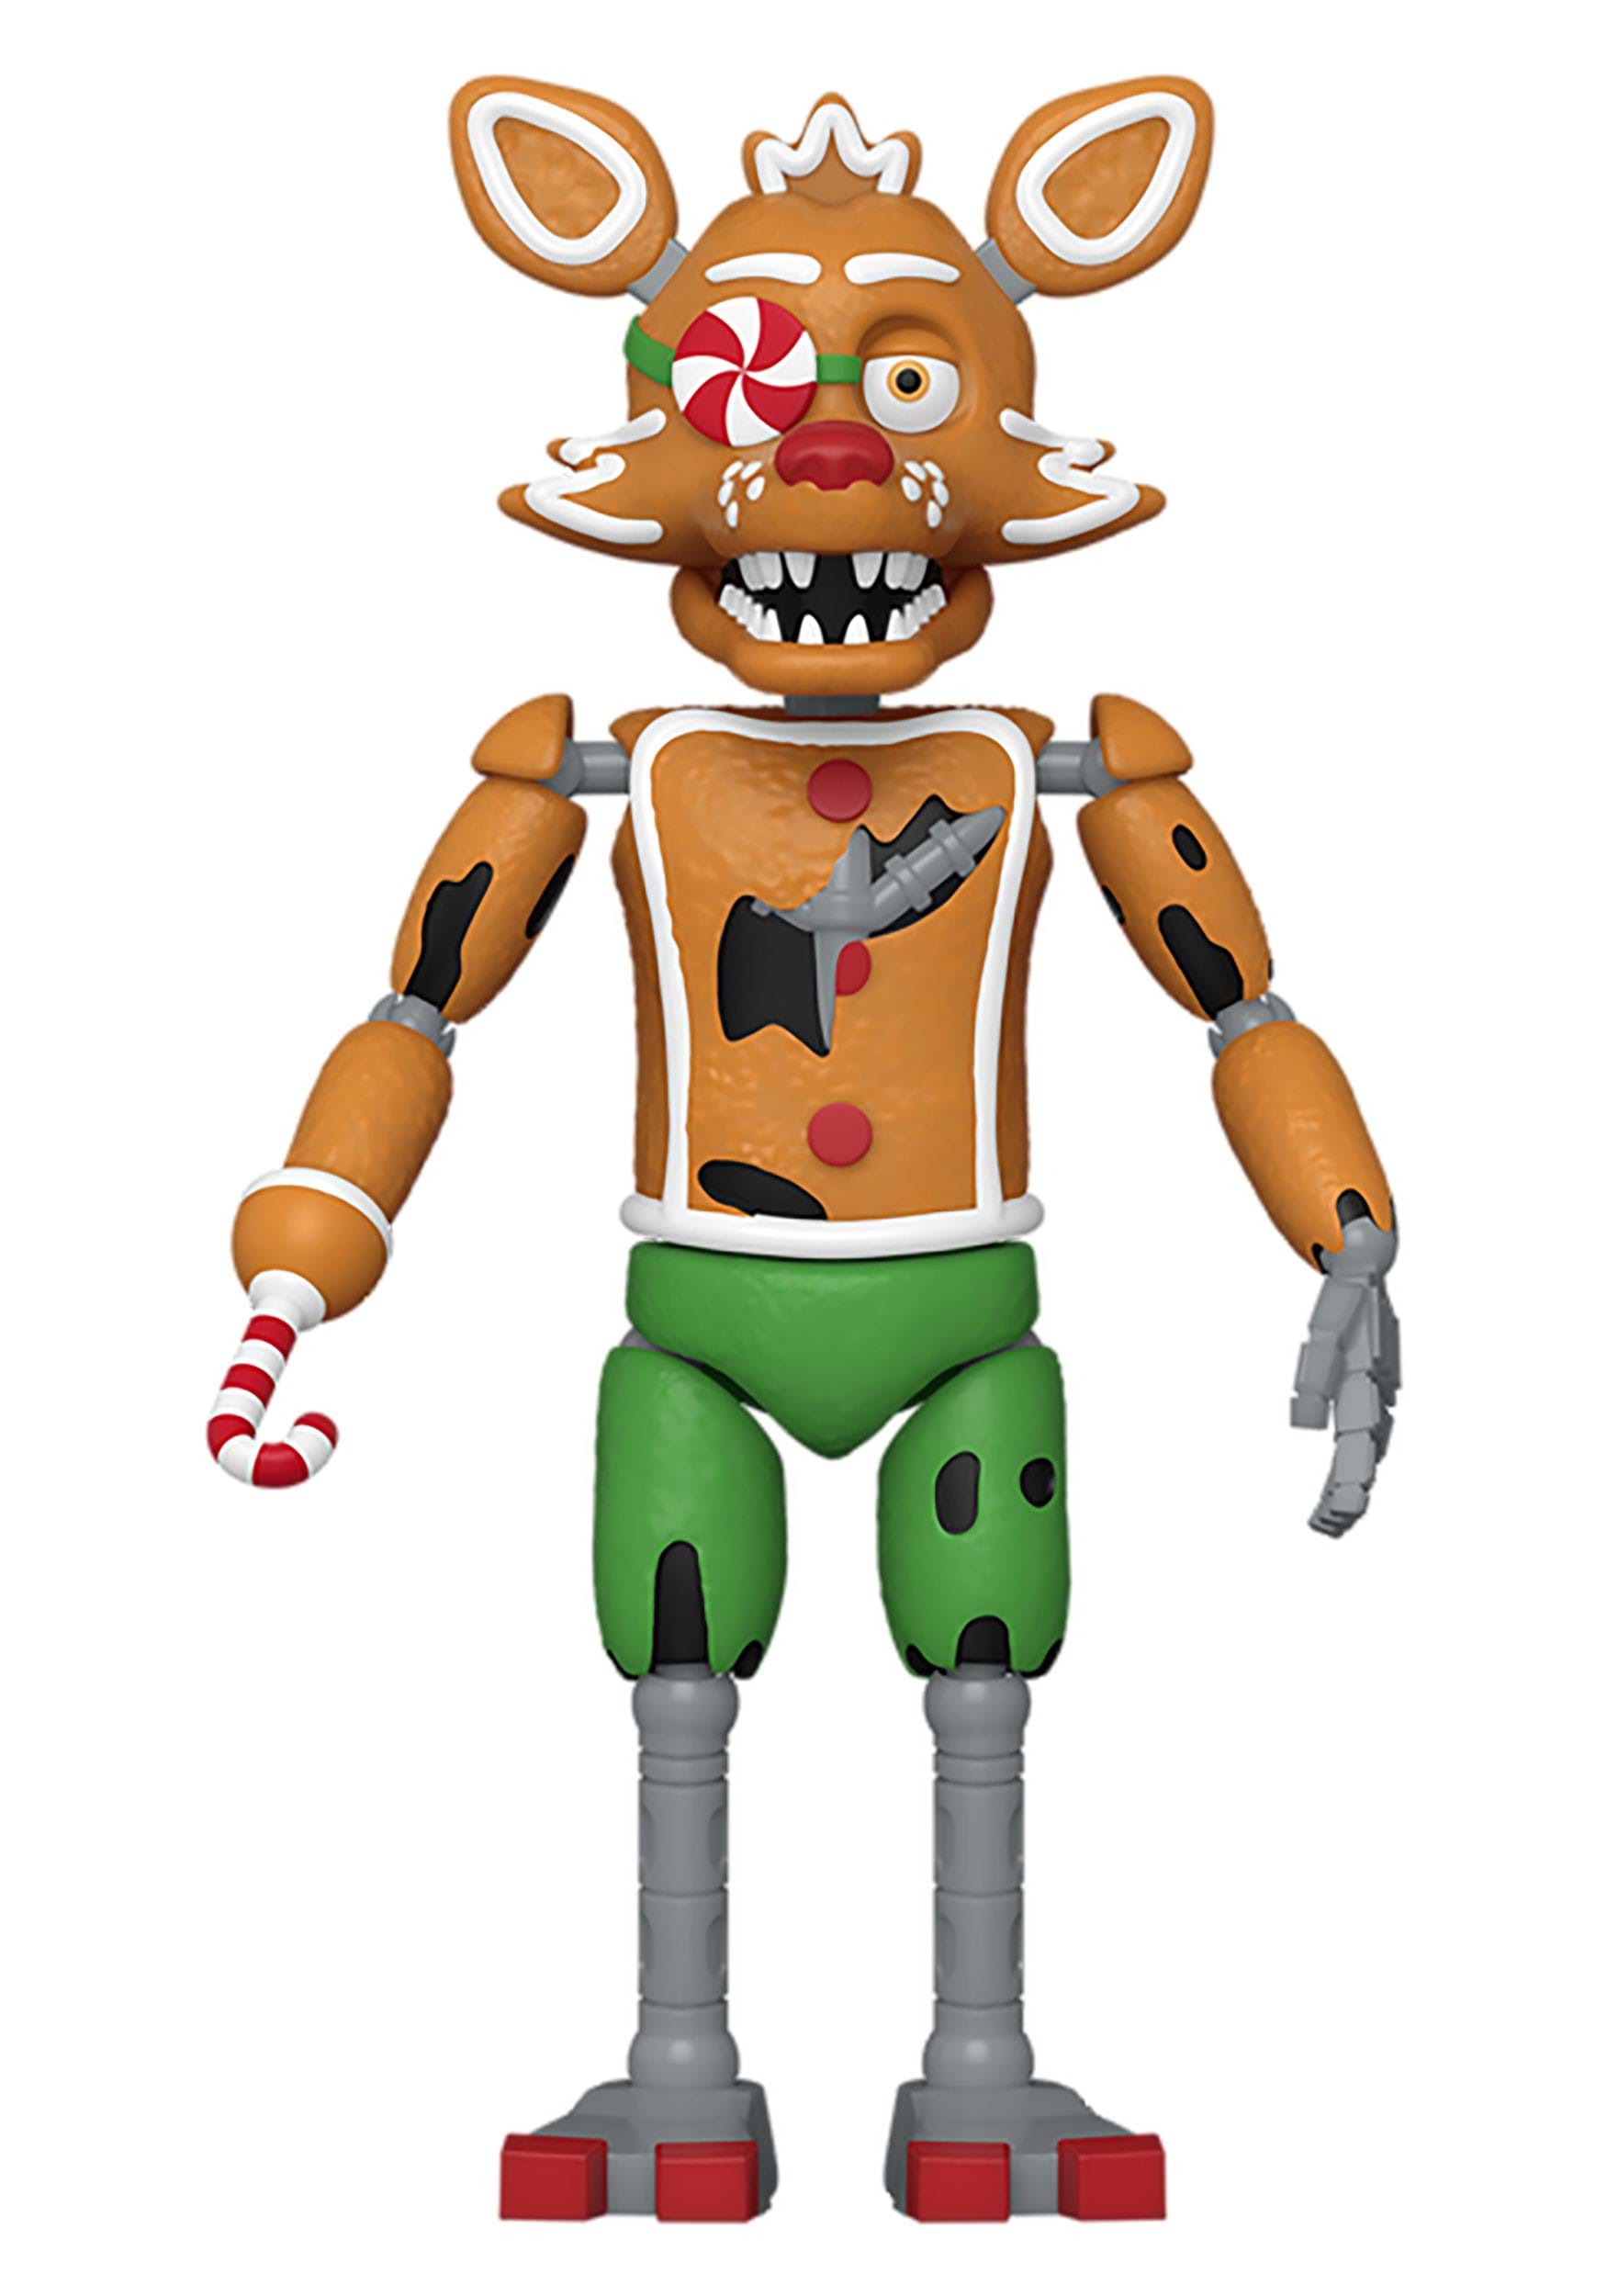 Five Nights at Freddys Gingerbread Foxy Funko Action Figure | Video Game Action Figures